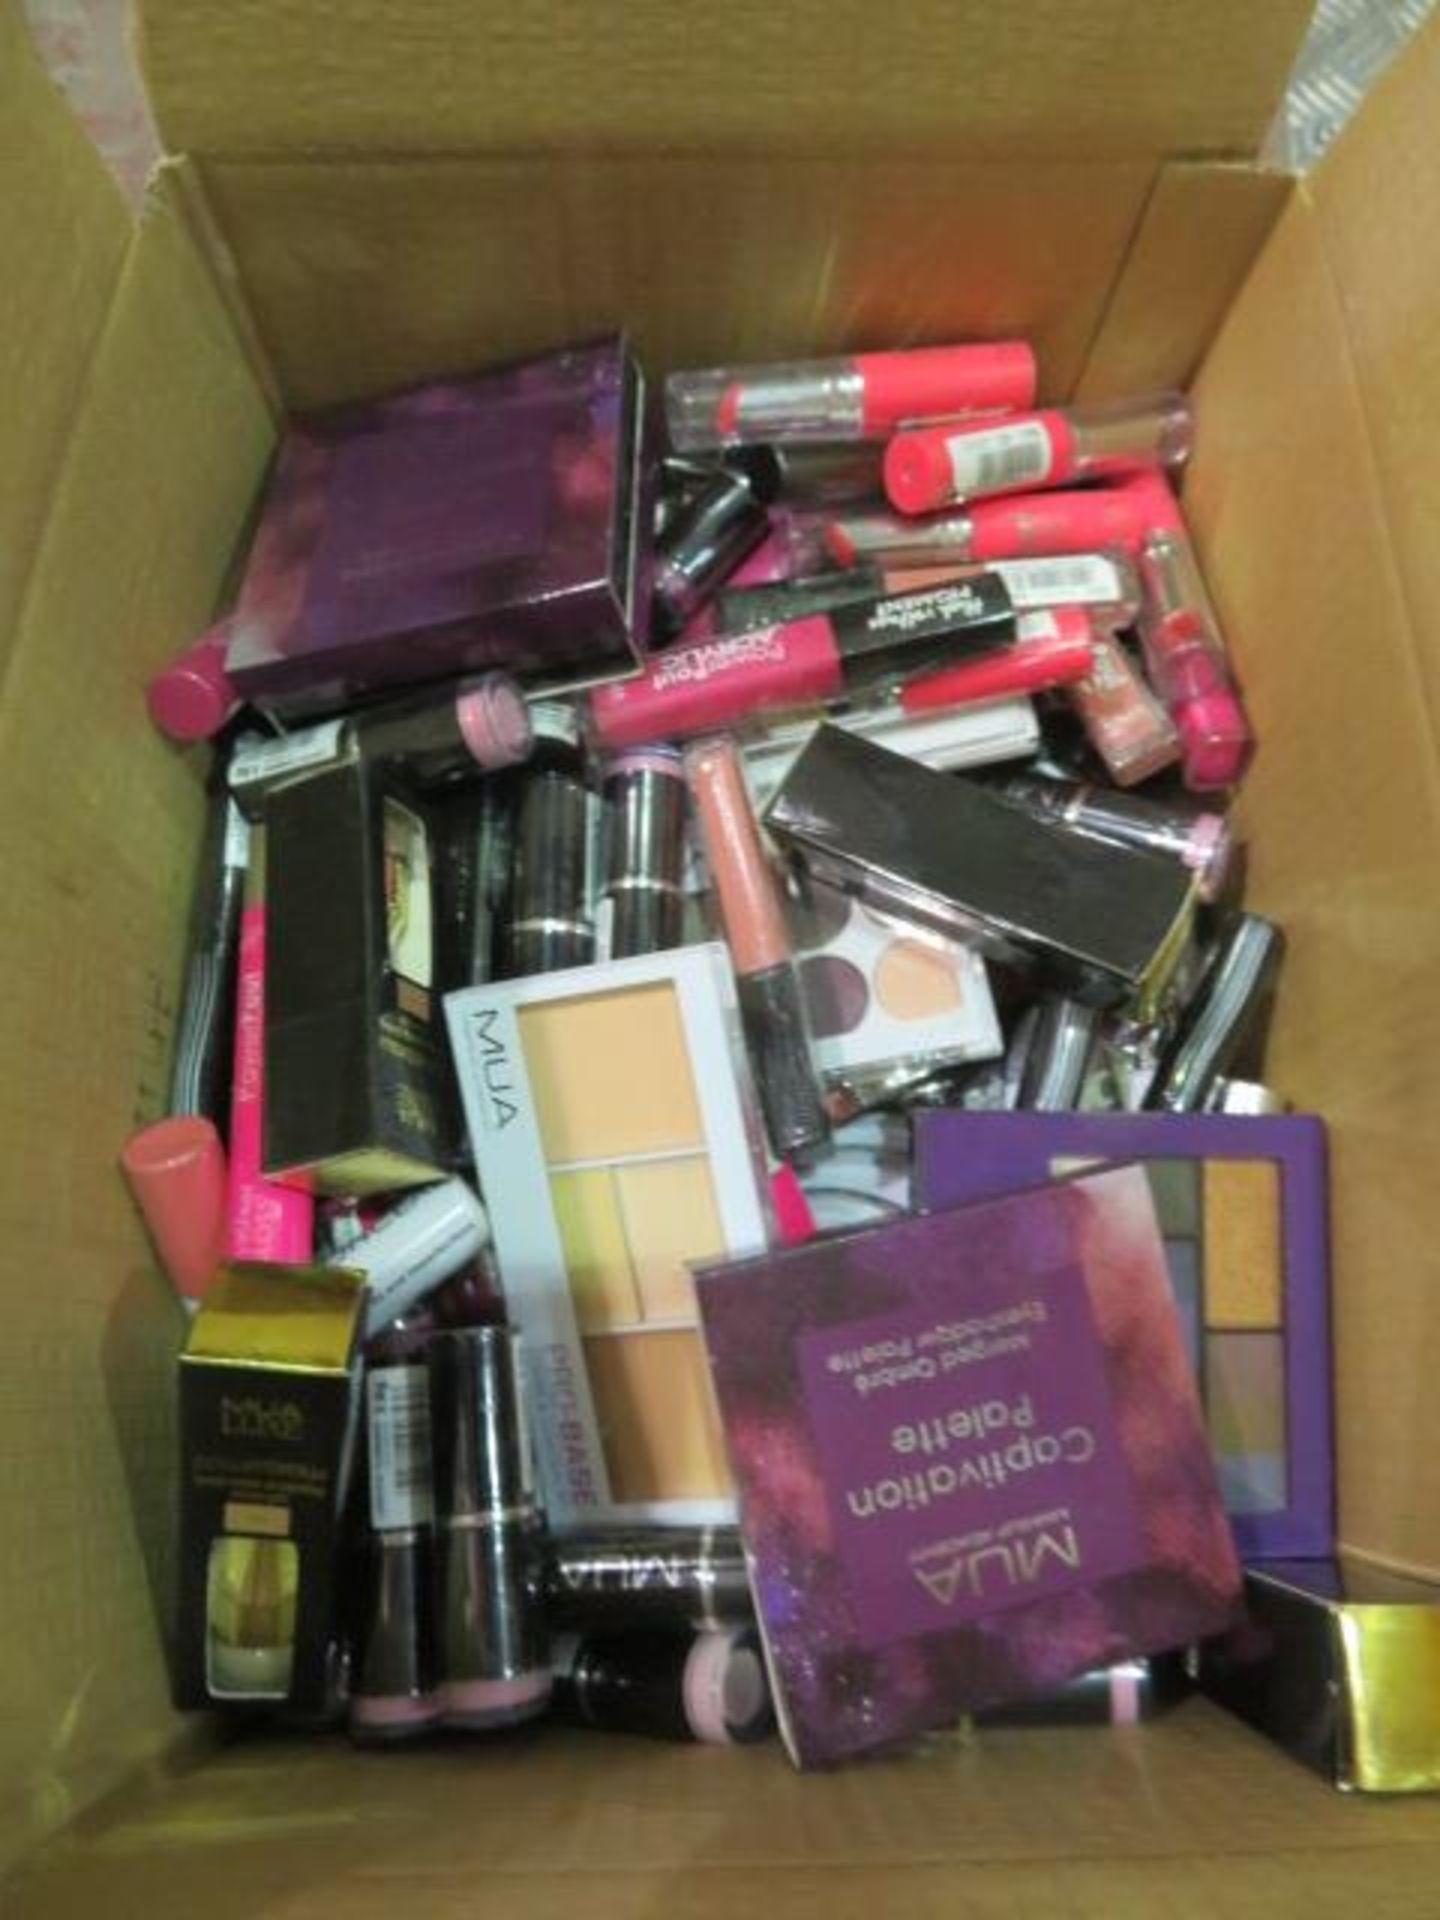 (Z164) Circa. 200 items of various new make up acadamy make up to include: power pout glaze, ca...